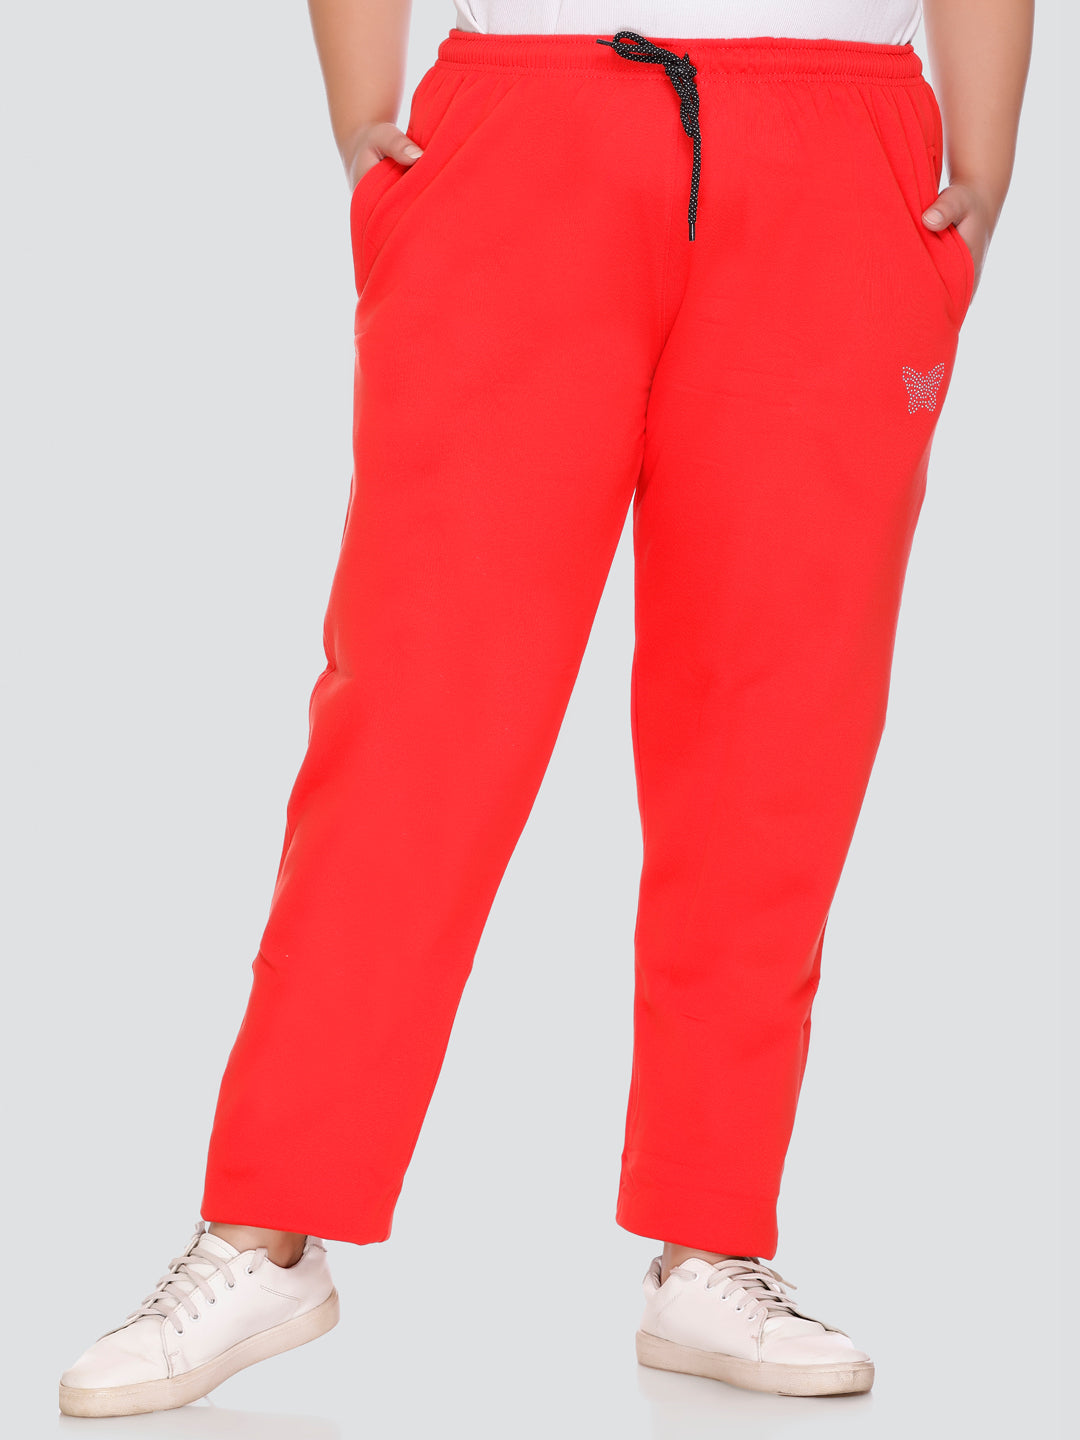 Buy Beige Track Pants for Women by Outryt Online | Ajio.com